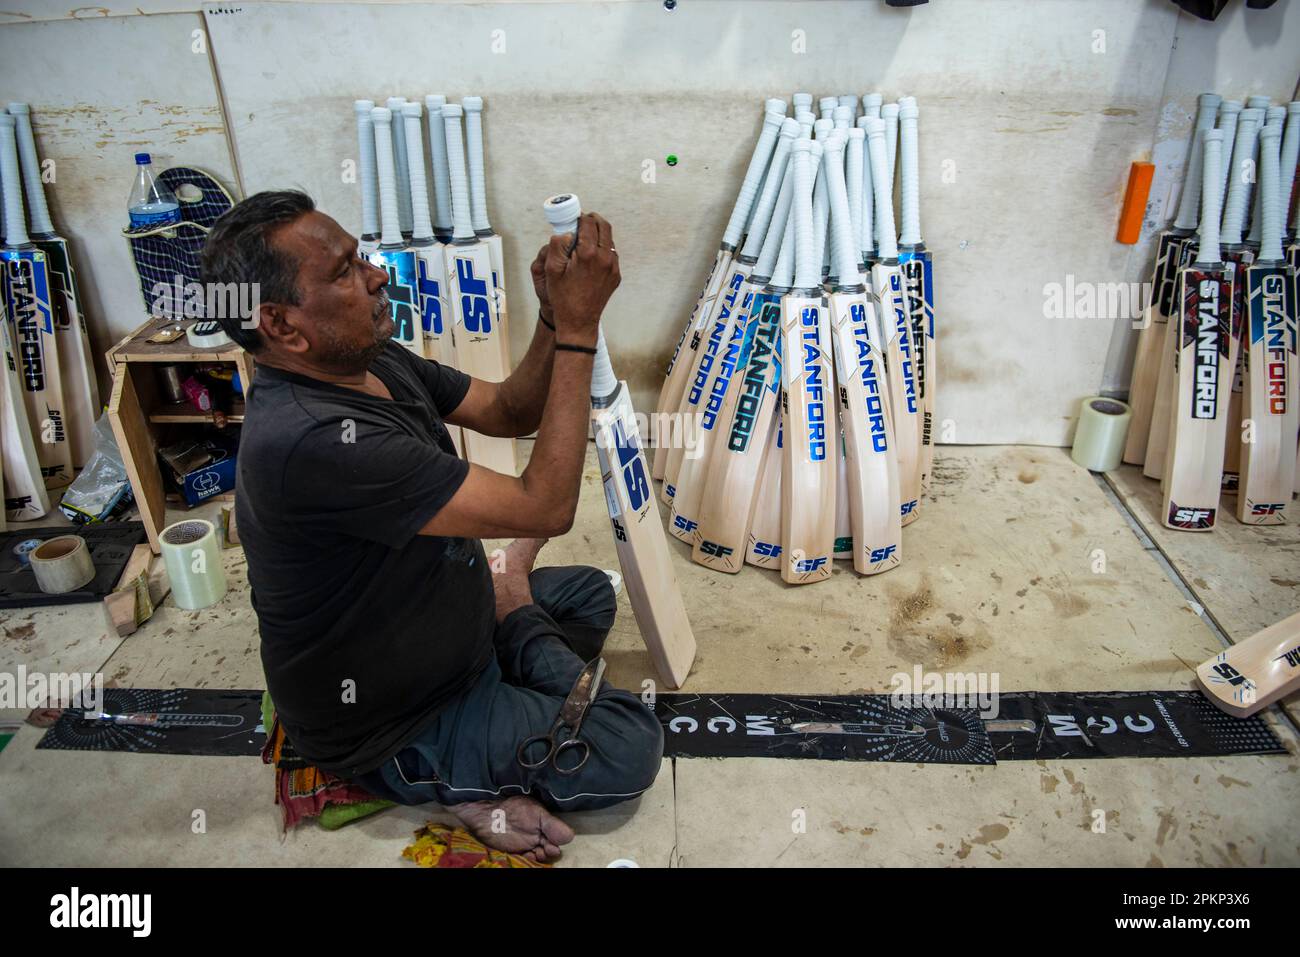 A worker applies rubber bat grip on cricket bat handle at the Stanford cricket equipment factory, Mawana Road